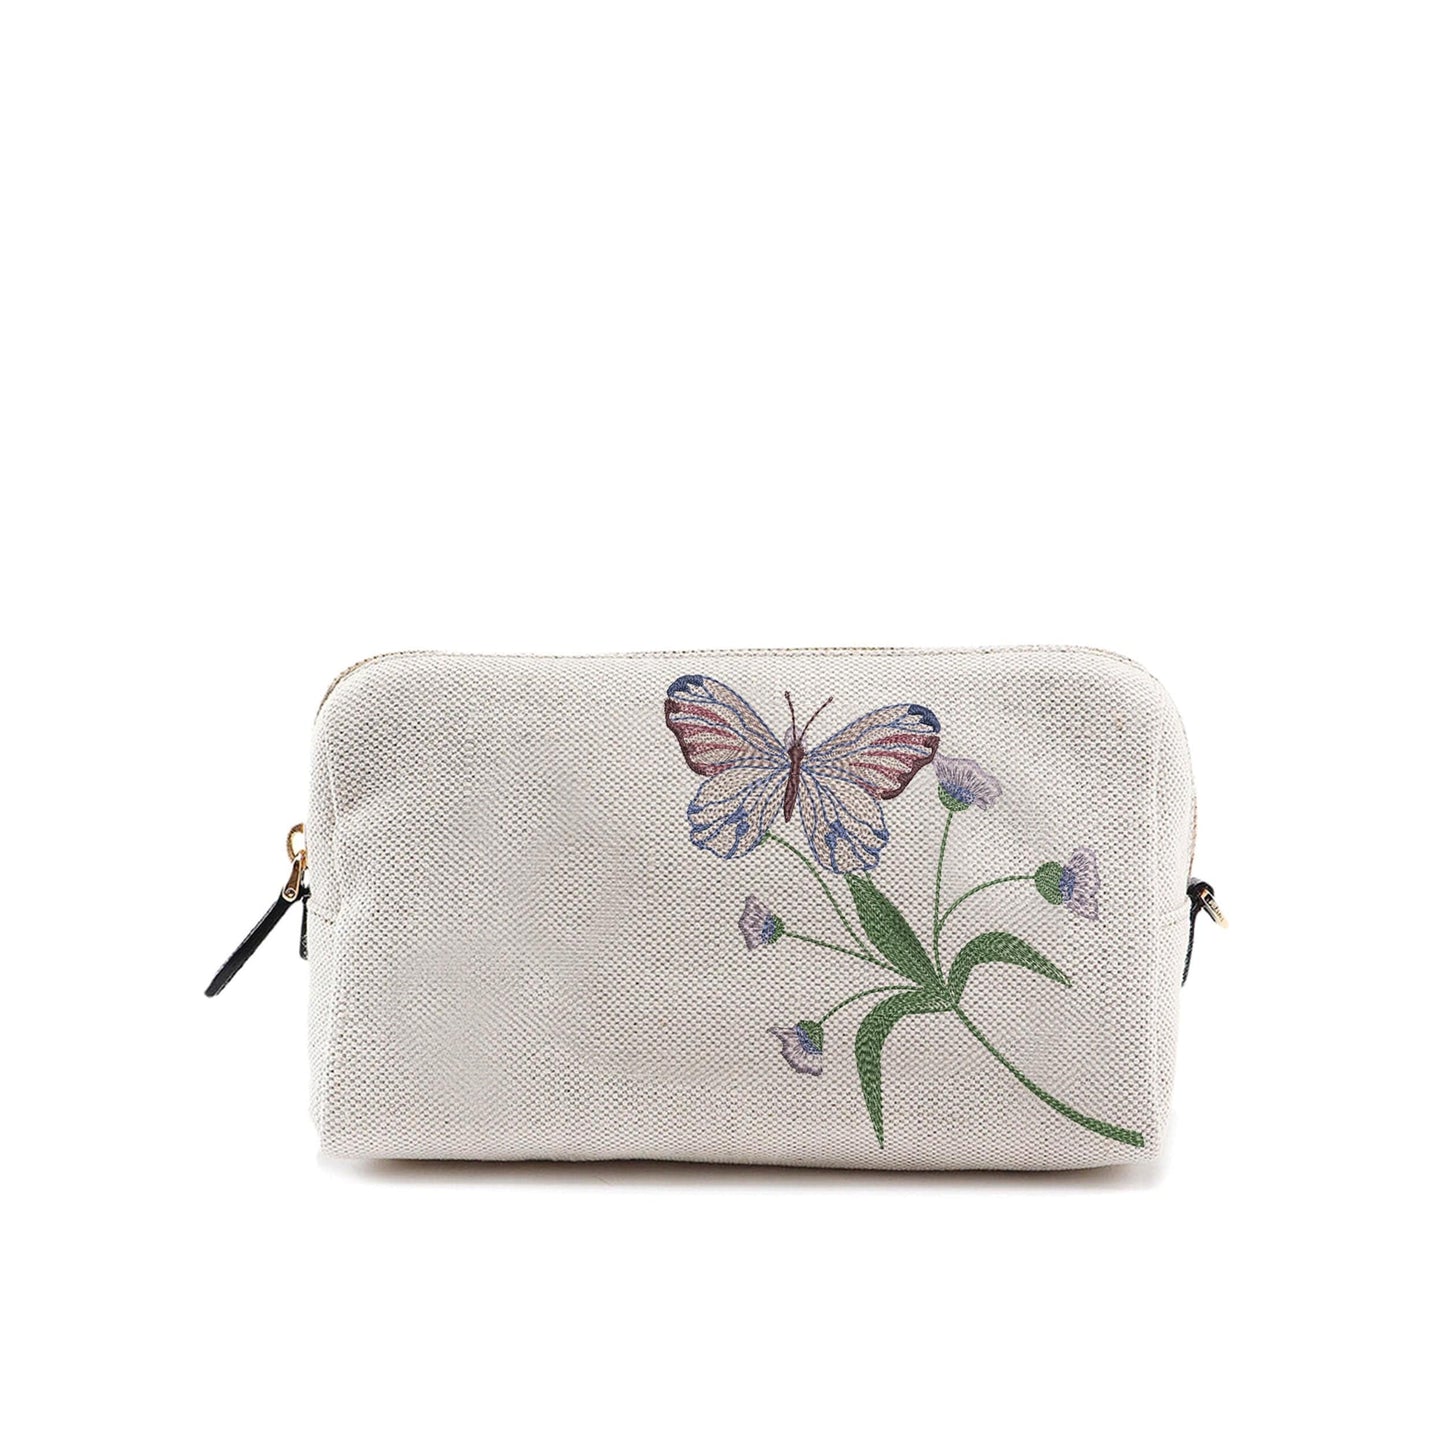 Flower Butterfly Machine Embroidery Design on pencil case